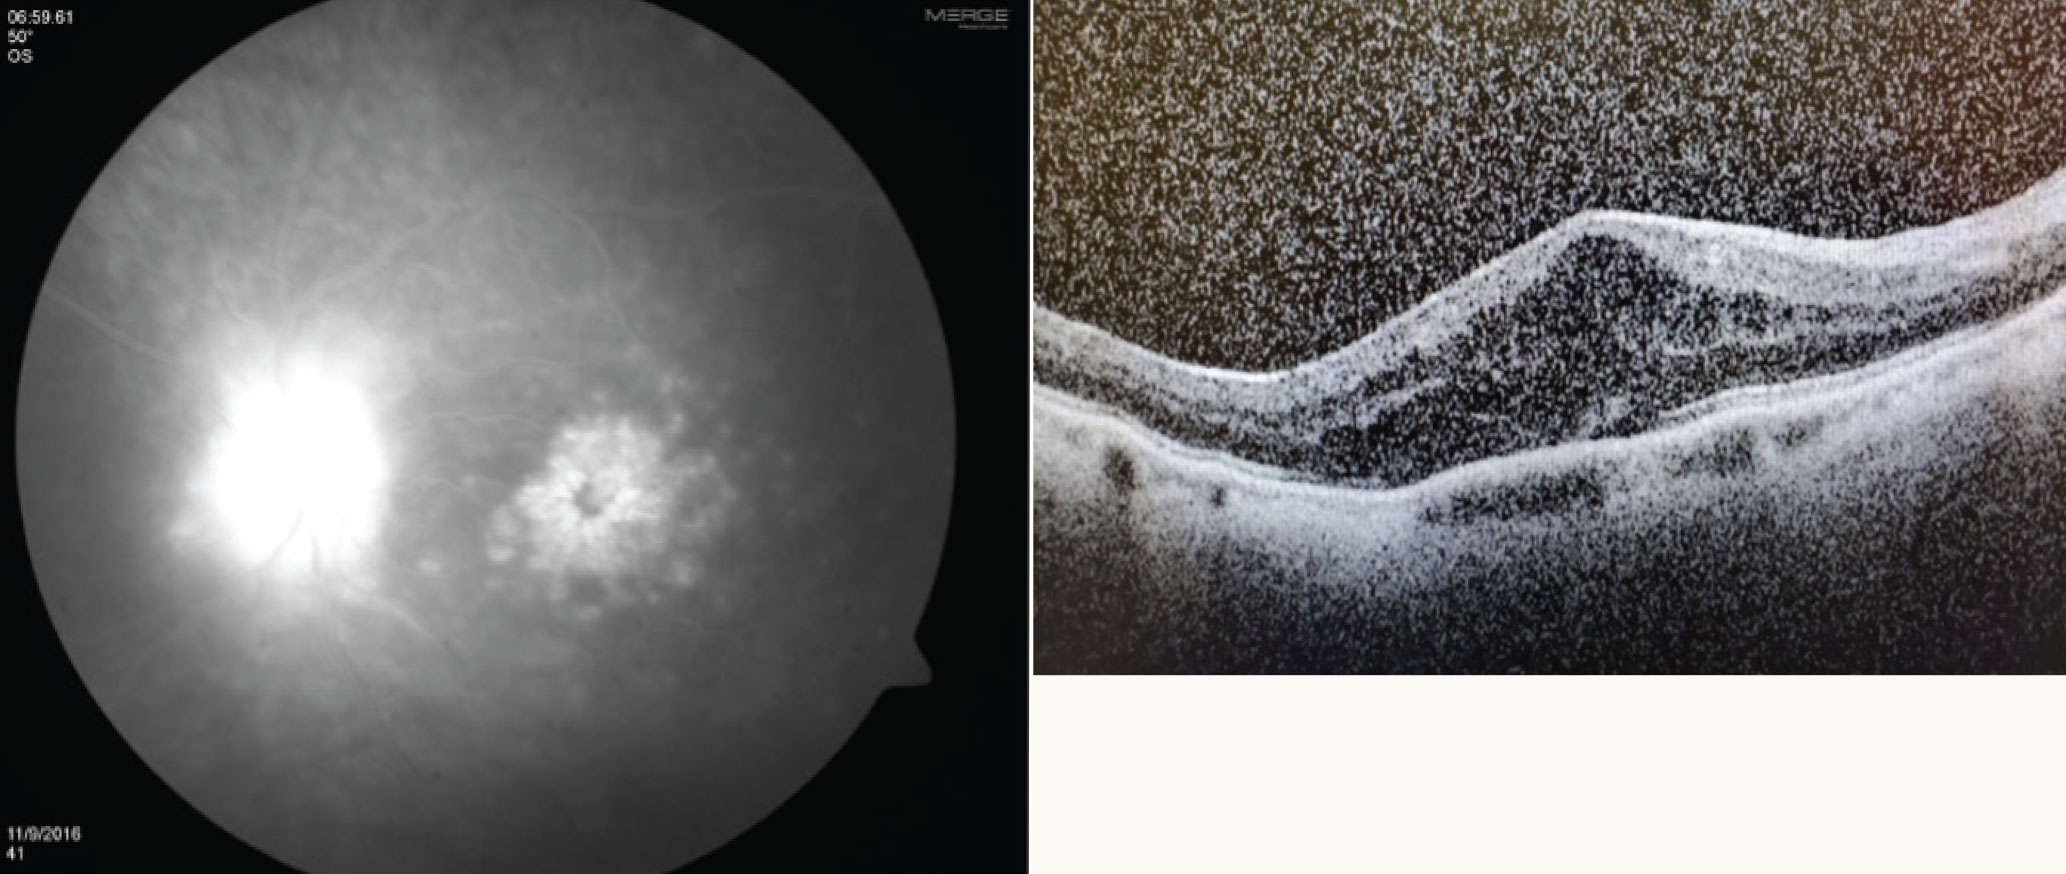 Cystoid macular edema on fluorescein angiography (left) and optical coherence tomography (right).Cystoid macular edema on fluorescein angiography (left) and optical coherence tomography (right).